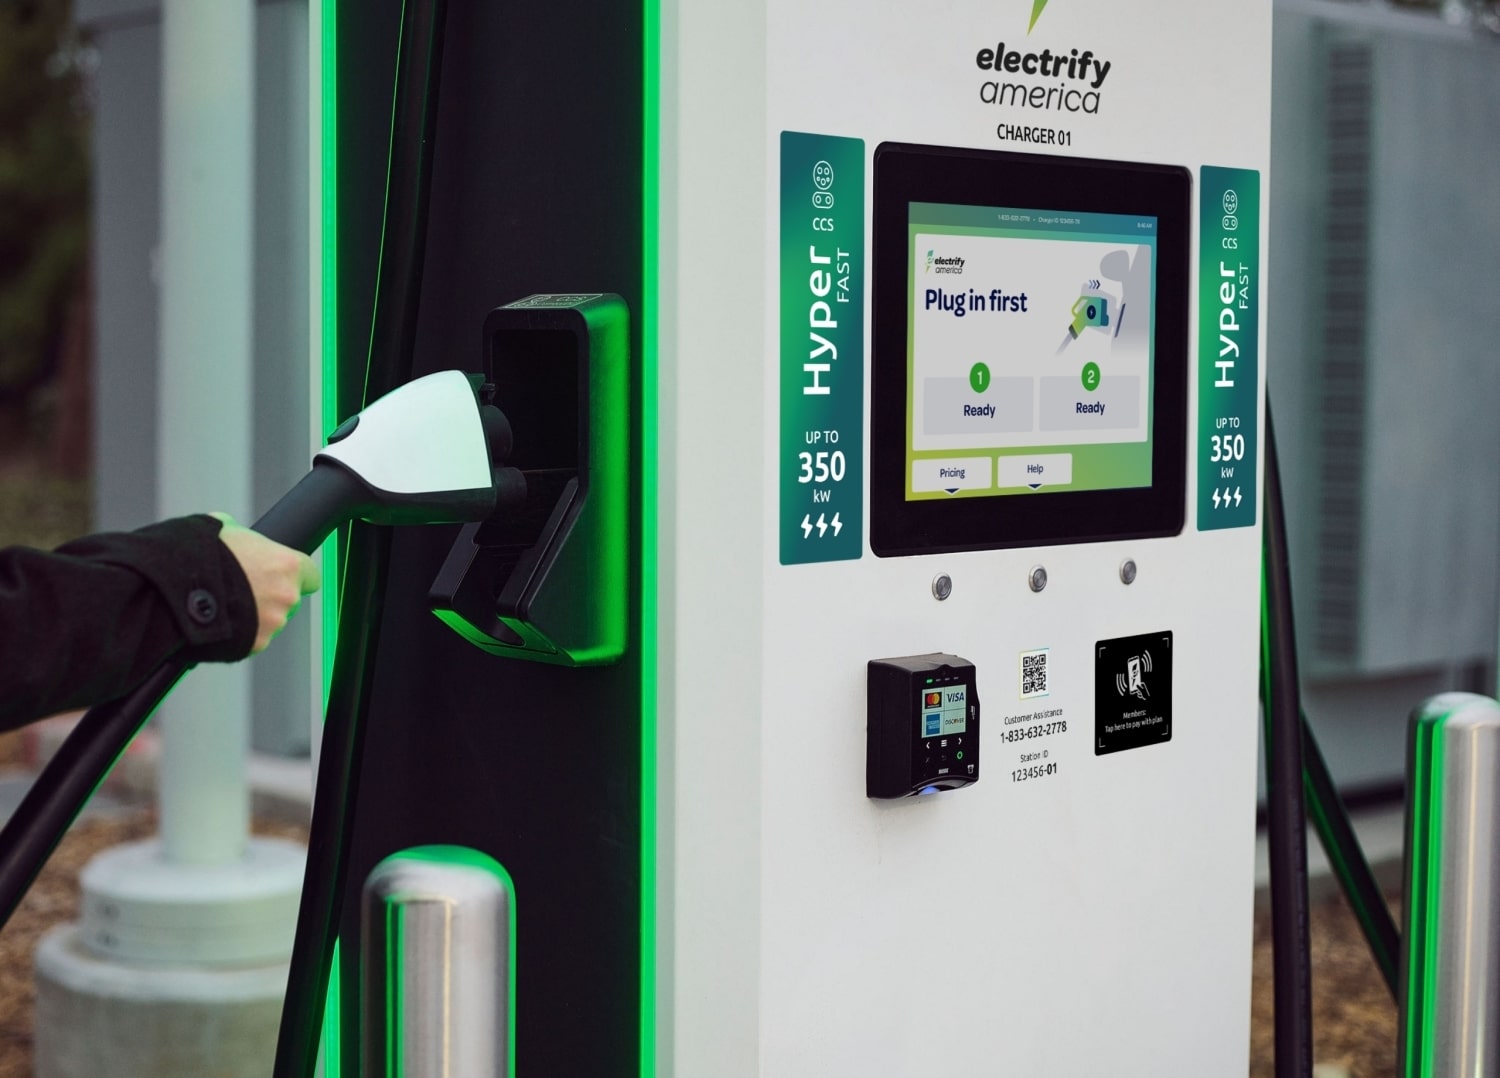 Electrify America also introduces new Balanced power technology chargers that optimize energy distribution to vehicles